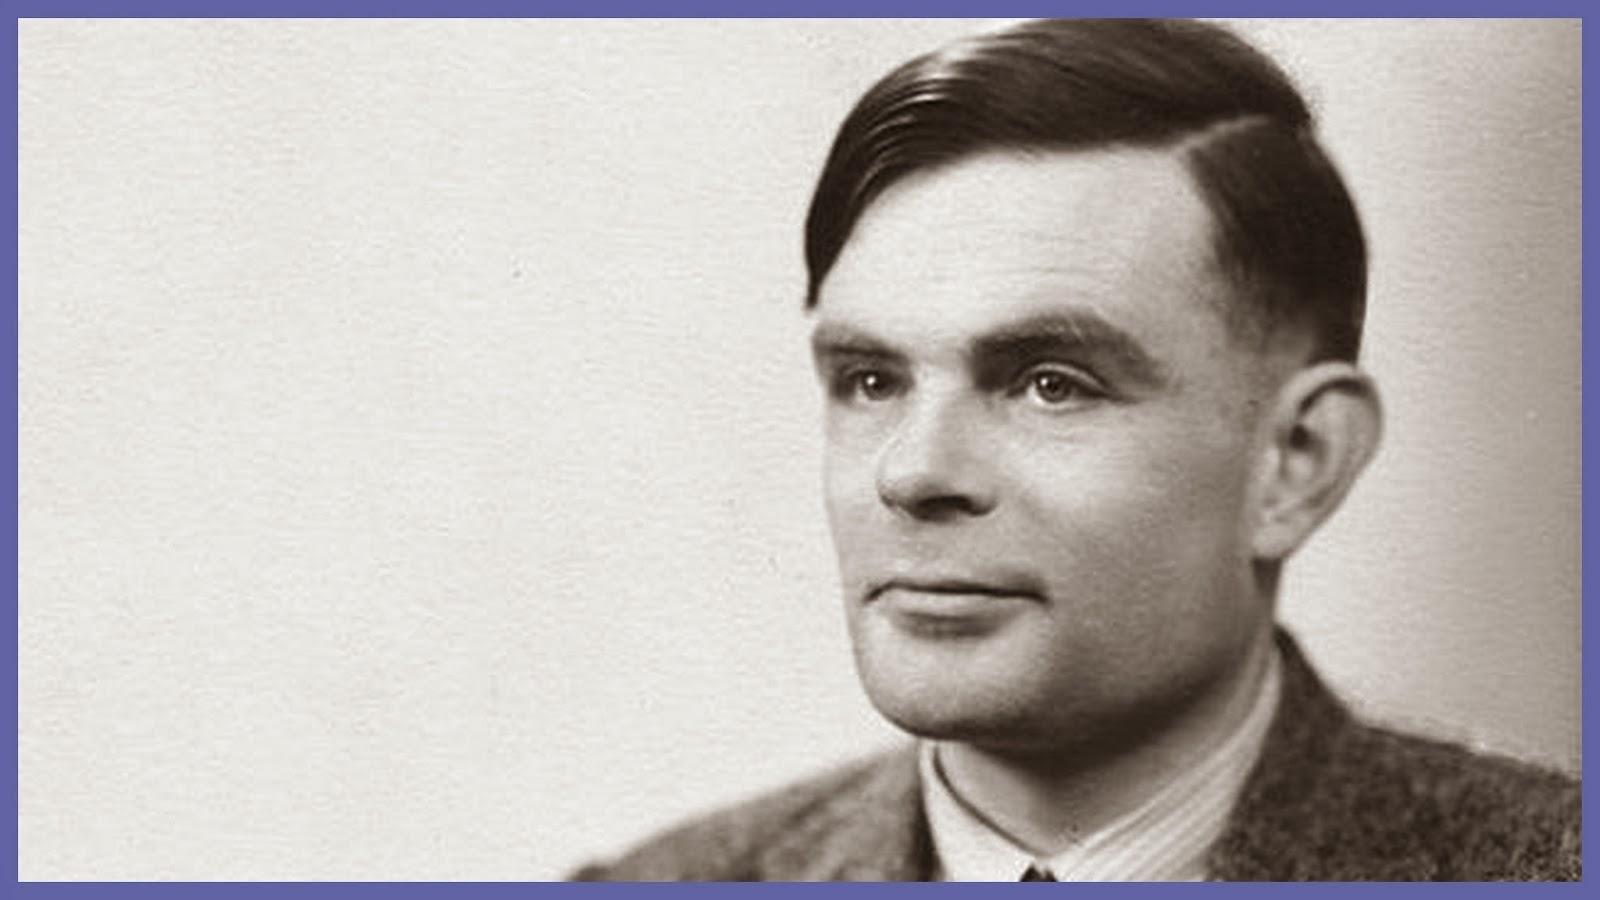 Re -Train Your Brain To Happiness: Alan Turing and The Imitation